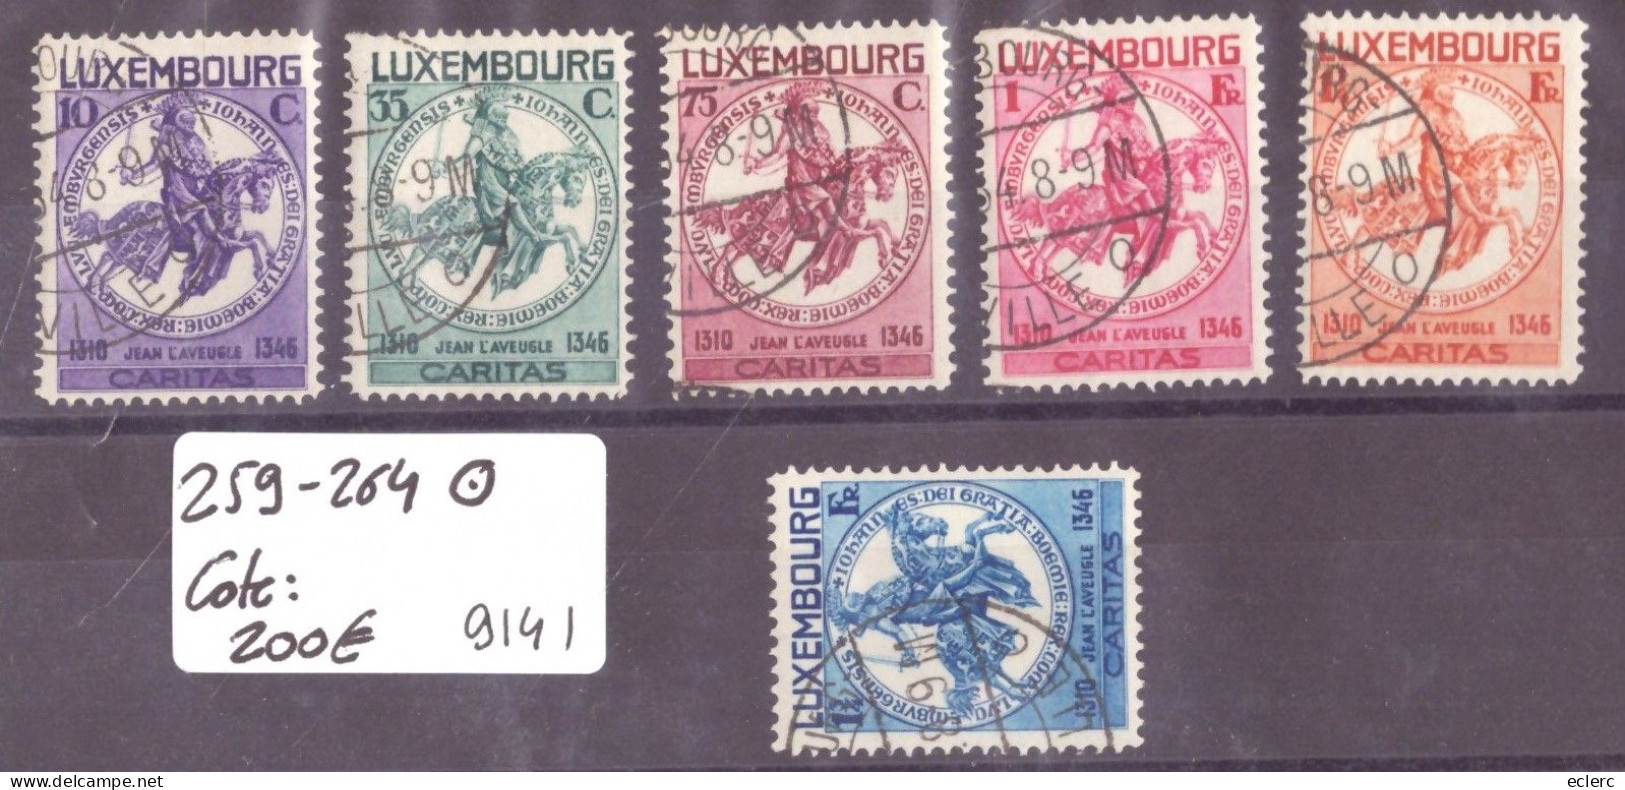 LUXEMBOURG - No Michel 259-264 OBLITERES - COTE: 200 € - Used Stamps